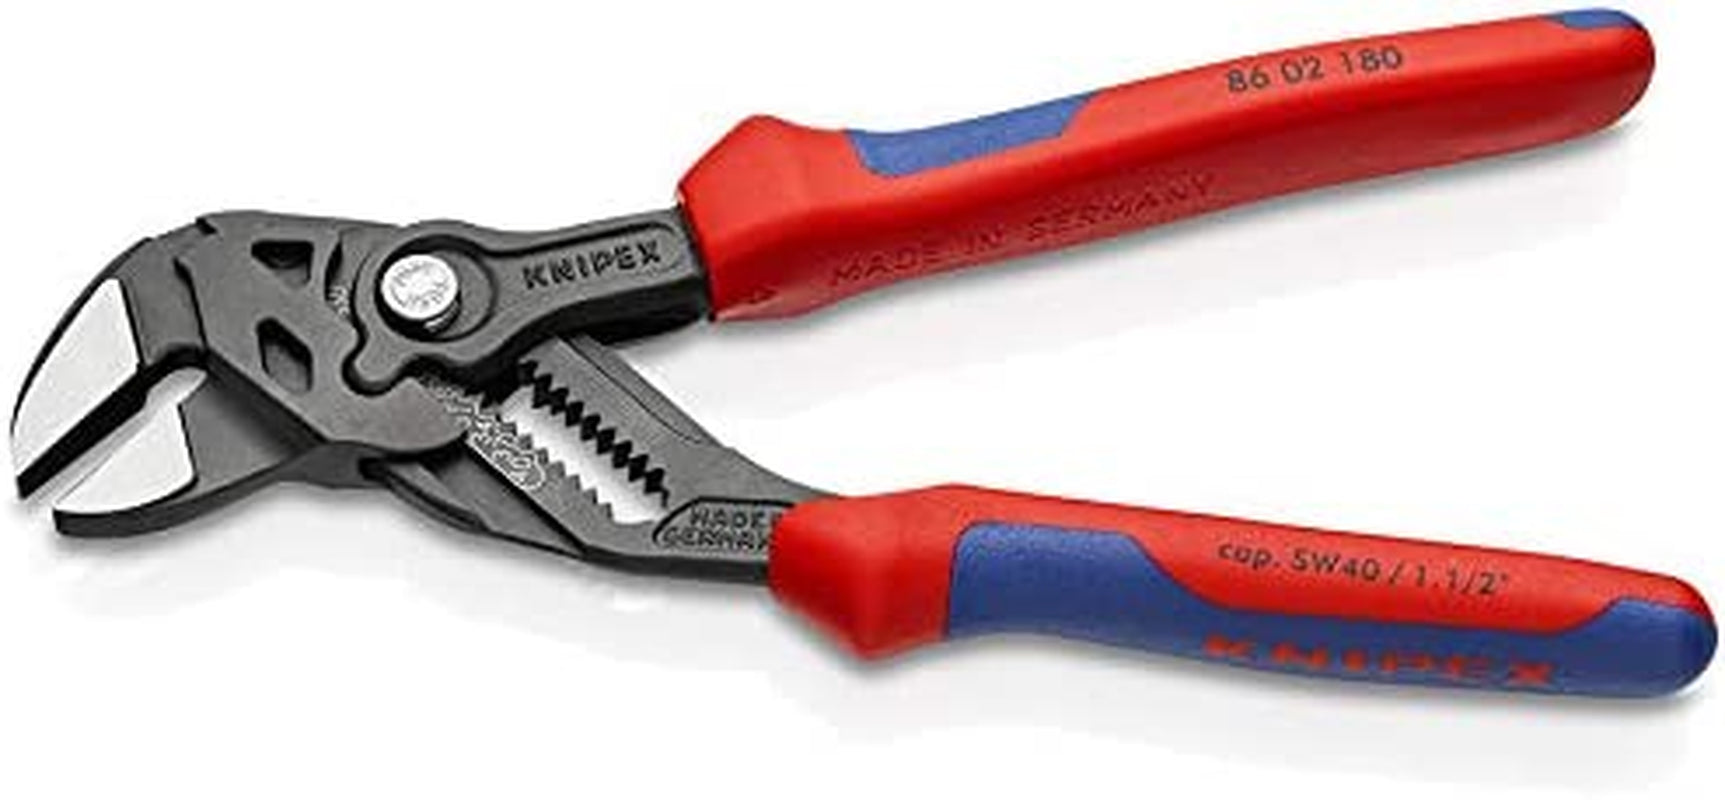 KNIPEX, KNIPEX Pliers Wrench Pliers and a Wrench in a Single Tool (180 Mm) 86 02 180, Red